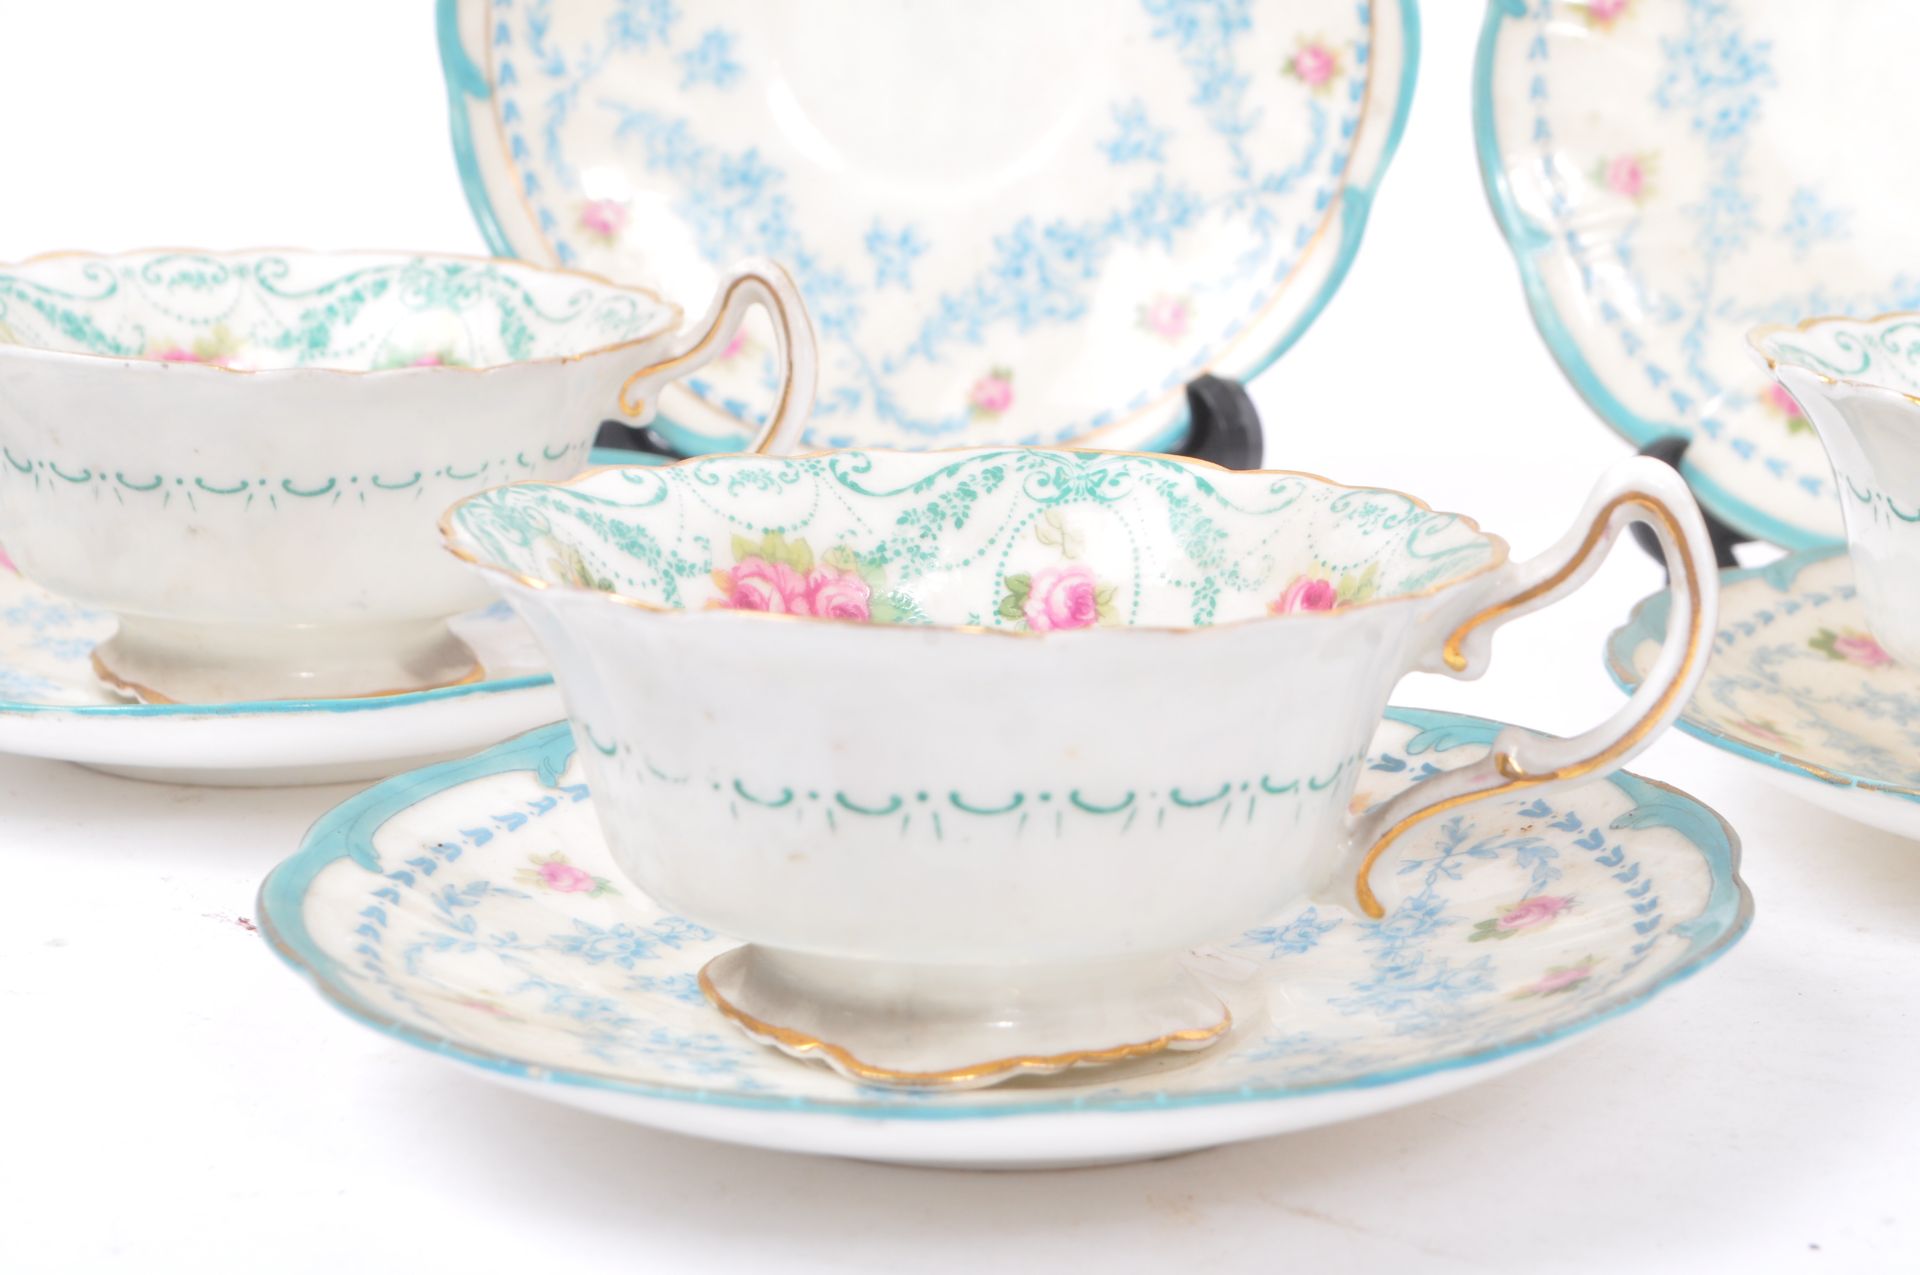 THREE EARLY 20TH CENTURY ROYAL DOULTON TEACUP & SAUCER - Image 2 of 5